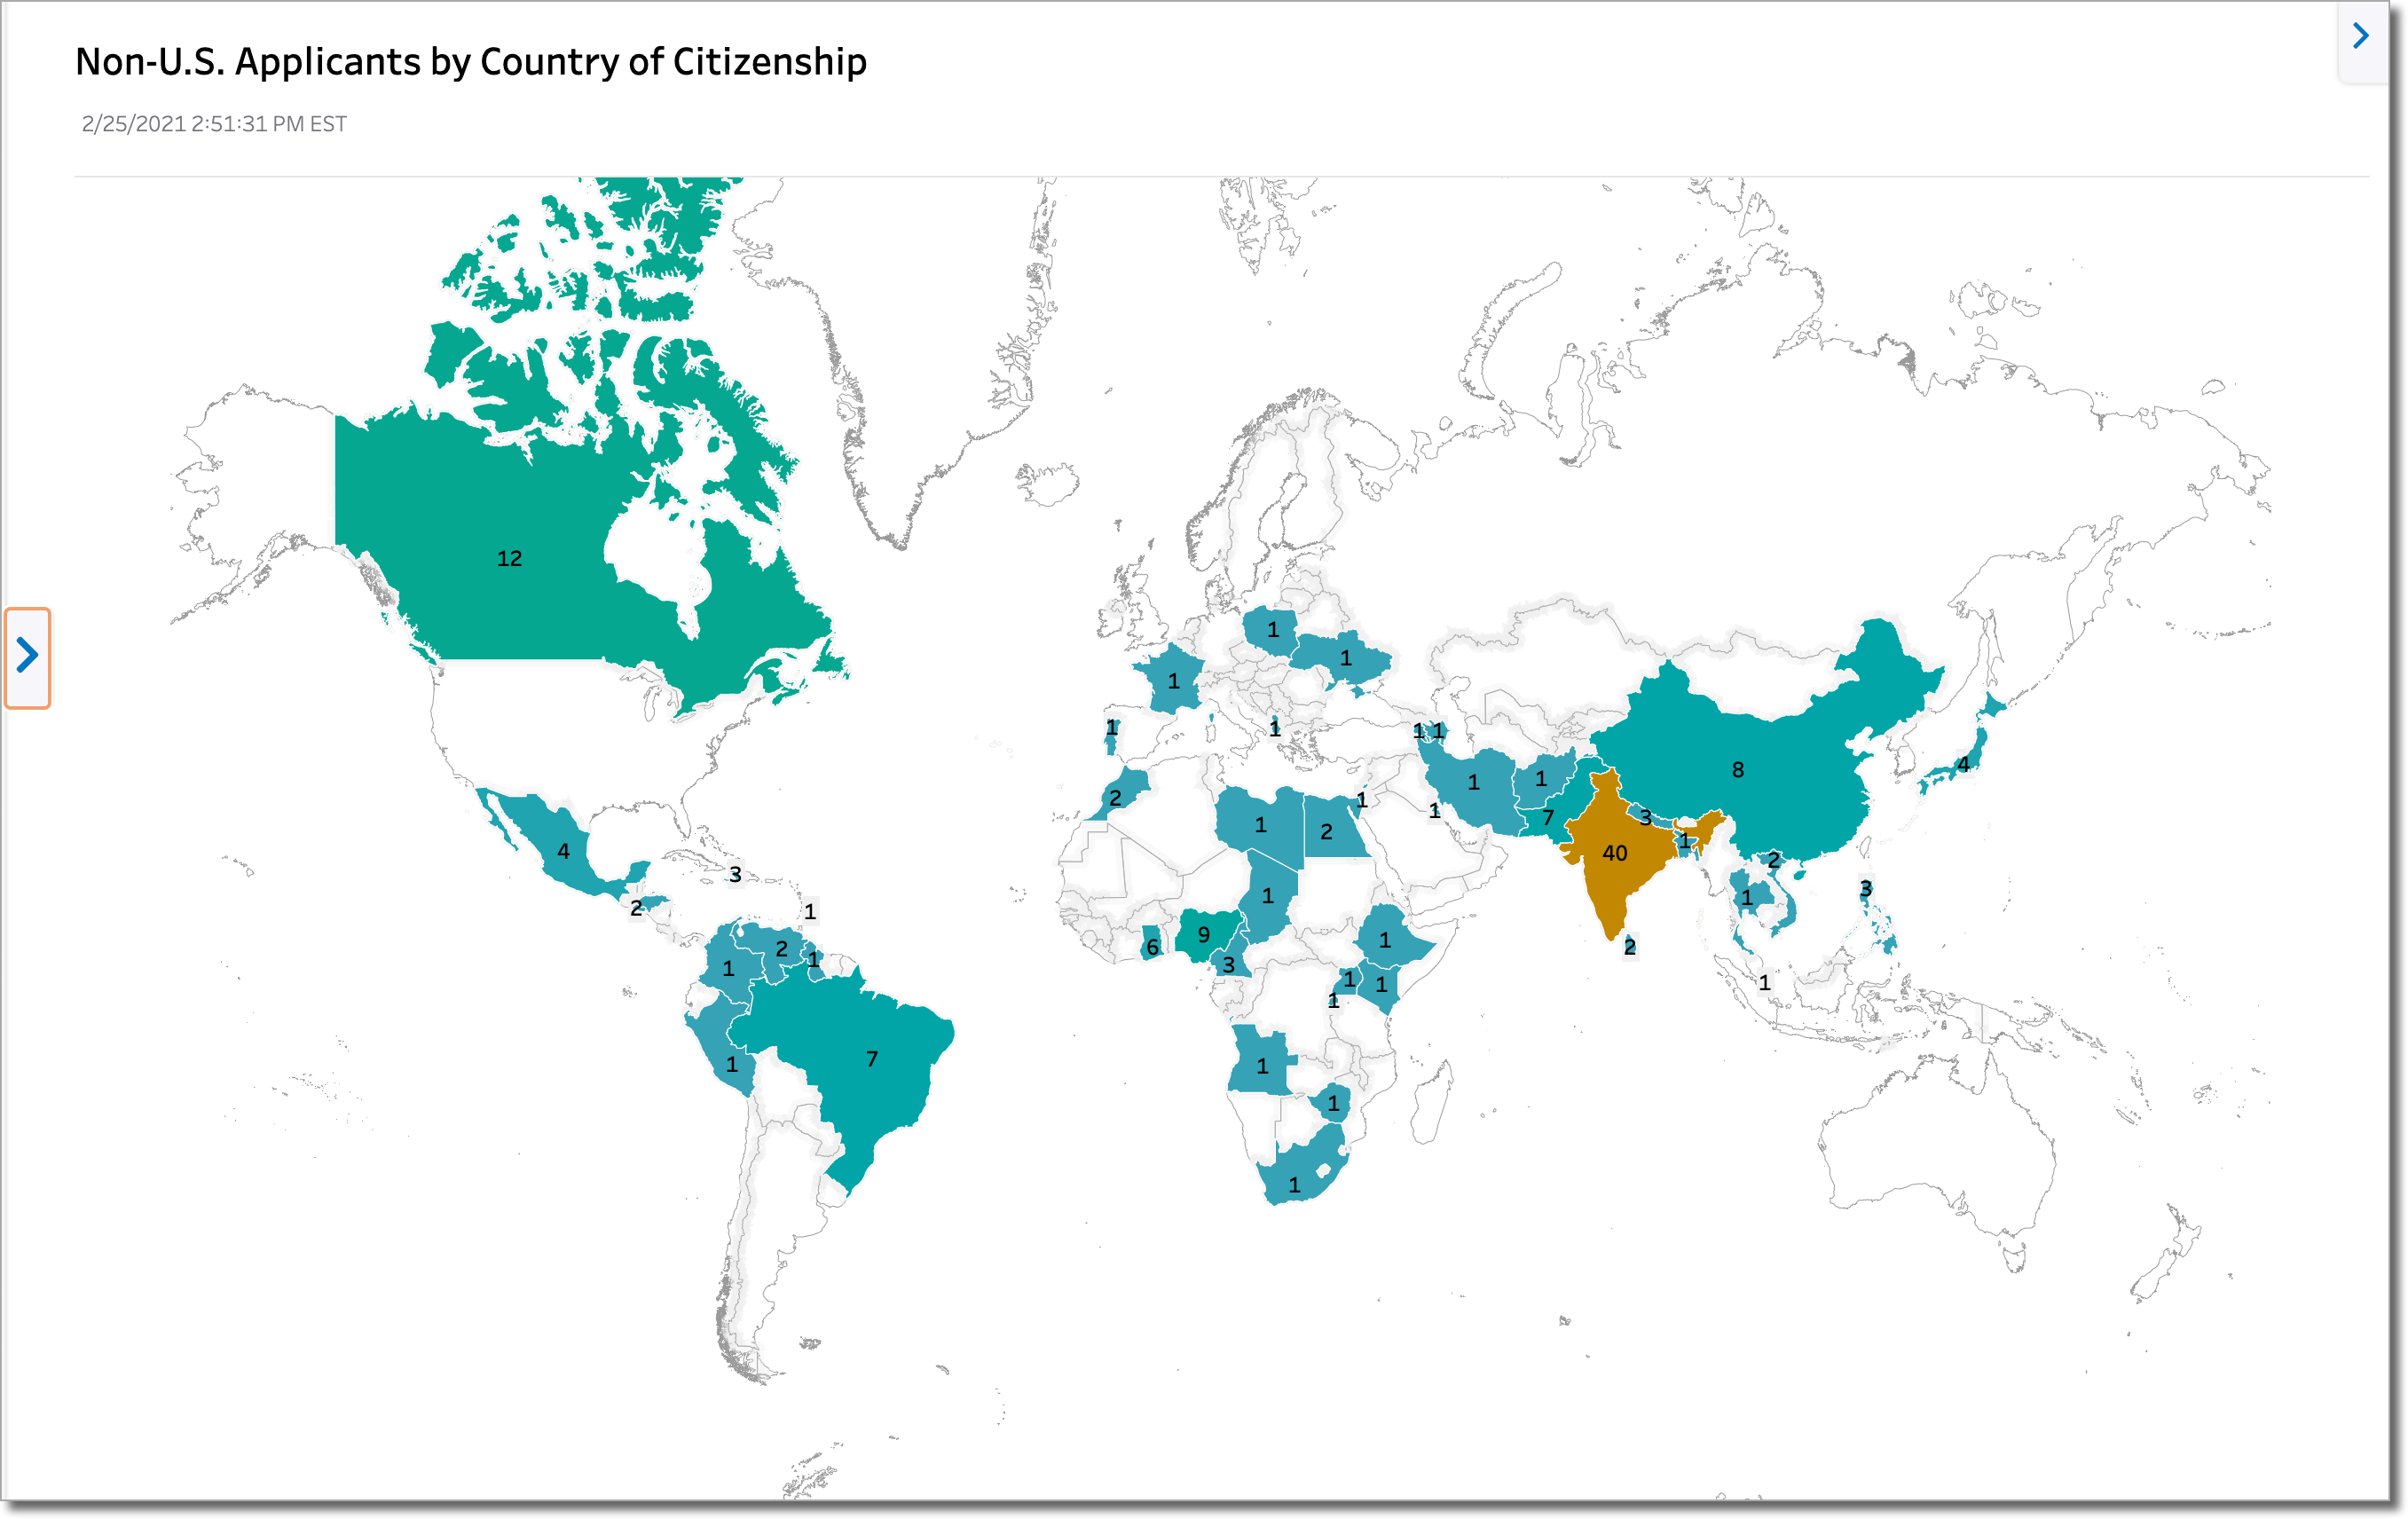 Example of a Non-US Applicants by Country of Citizenship dashboard showing a color-coded map of the world and the number of applicants per country